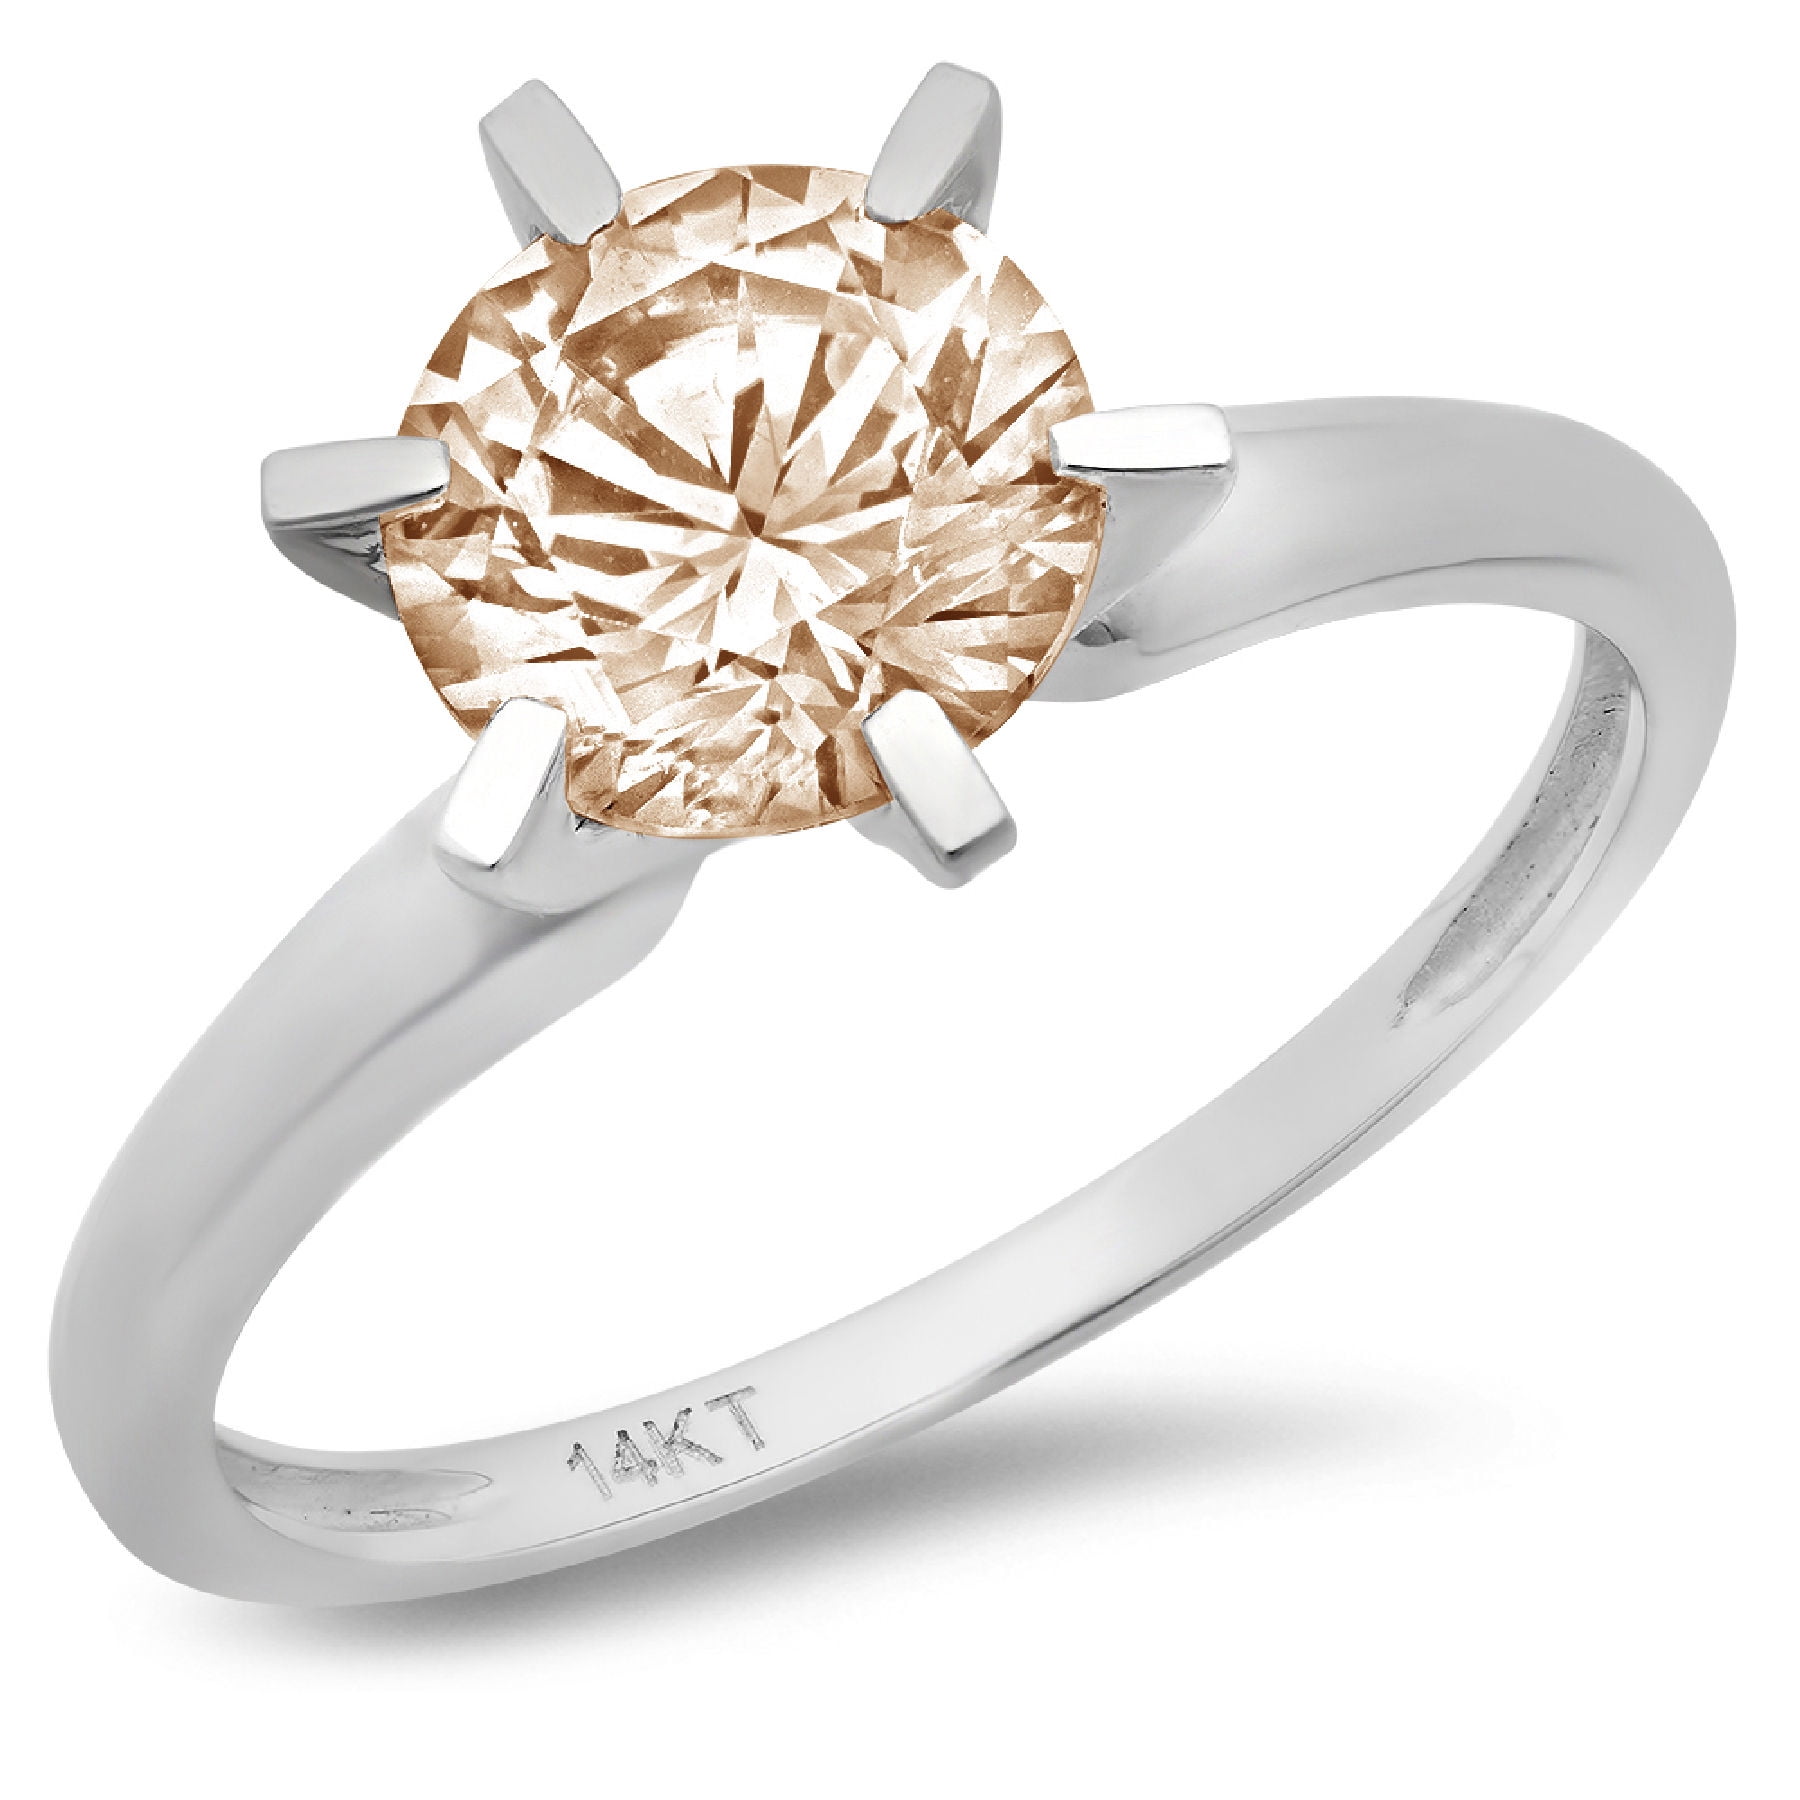 Details about   2CT Asscher Cut Diamond Double 4-Prong Solitaire Engagement Ring 14k Gold Plated 